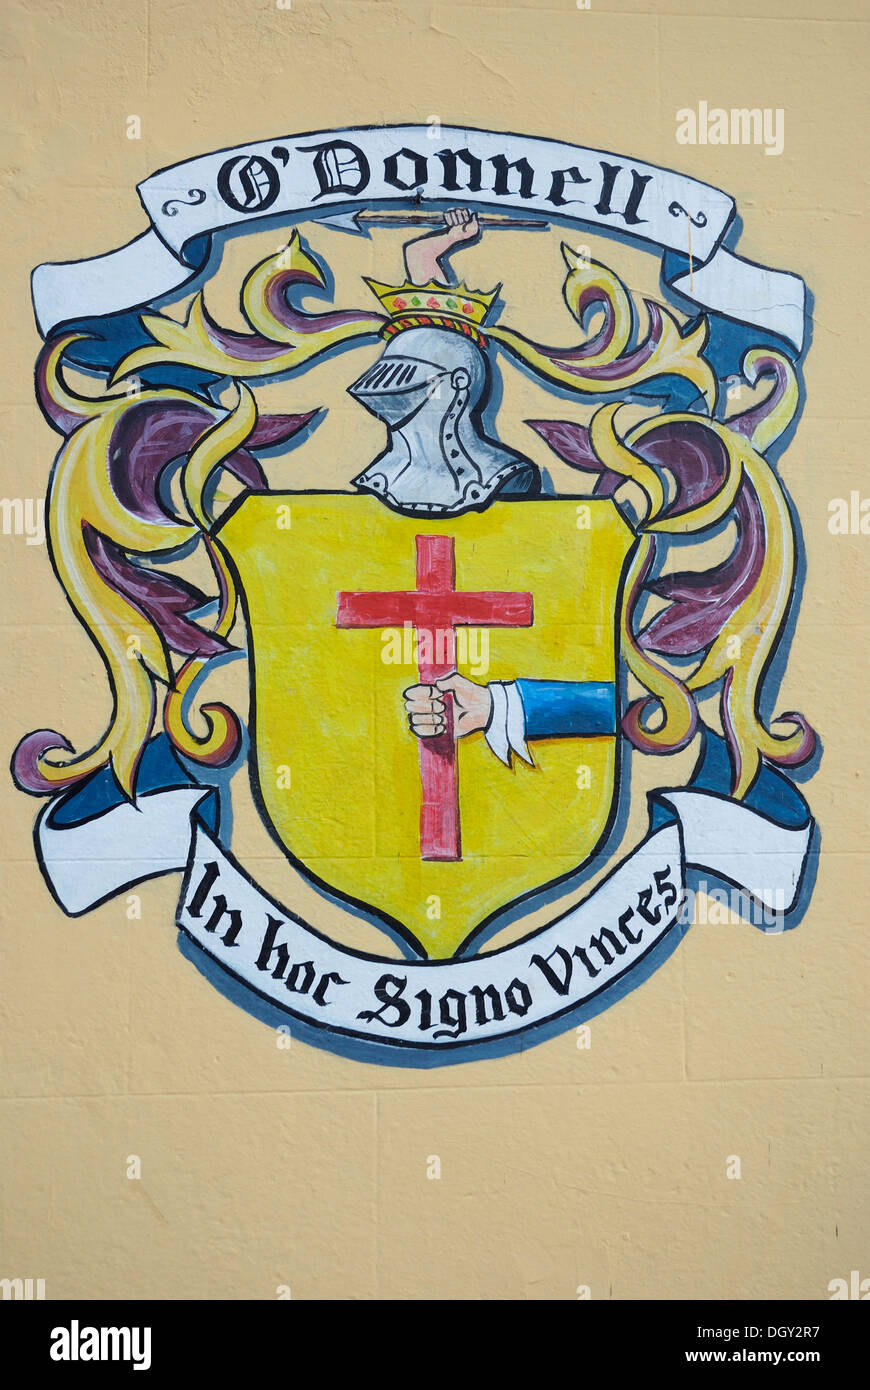 Coat of arms of the O'Donnell family on a house wall, Ratmelton, County Donegal, Ireland, Europe Stock Photo